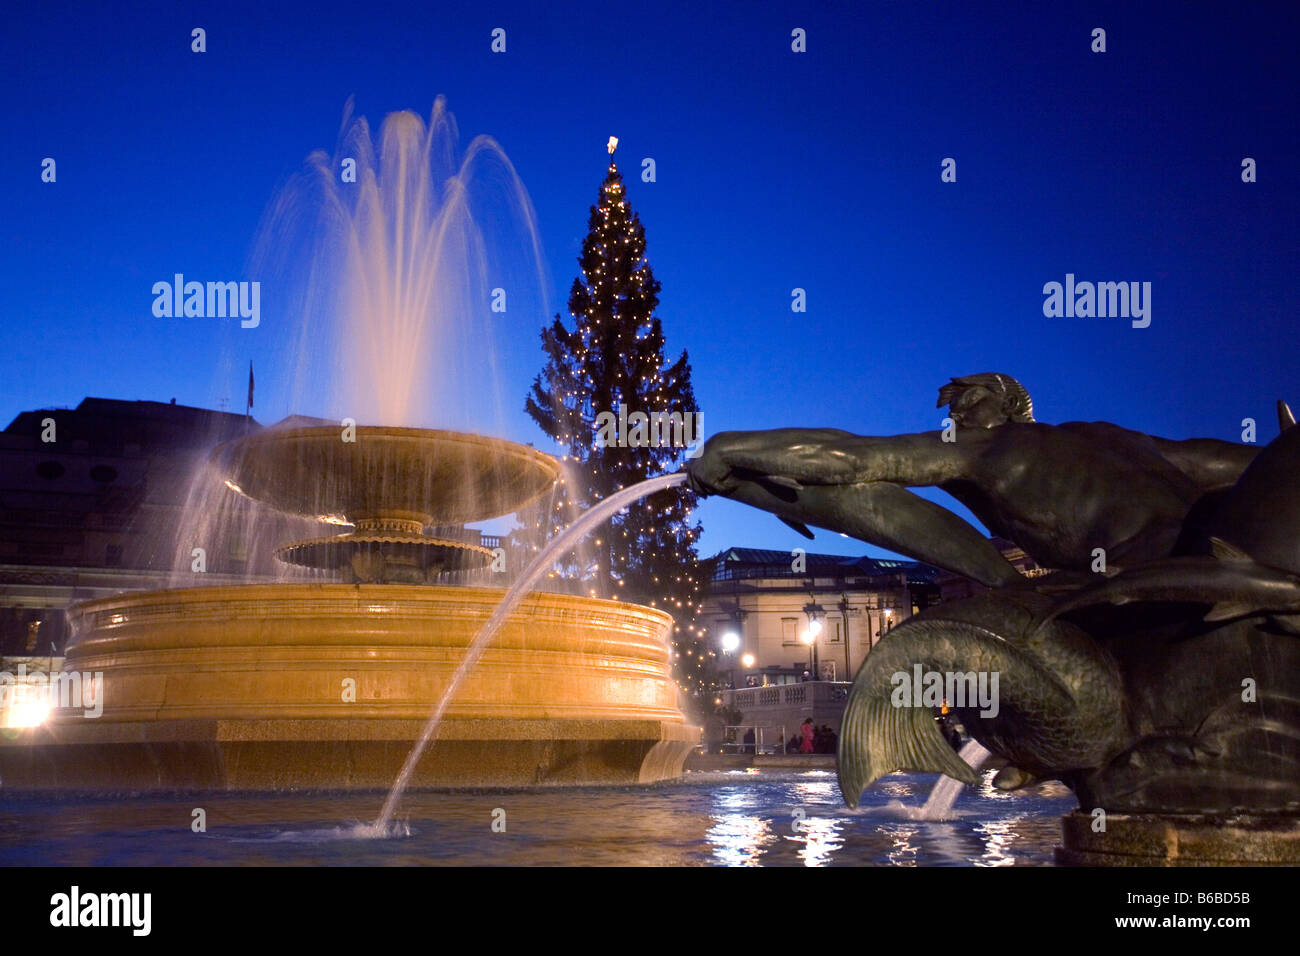 The Fountains and The Christmas Tree at Trafalgar Square in London which is a gift from Norway each year. Stock Photo